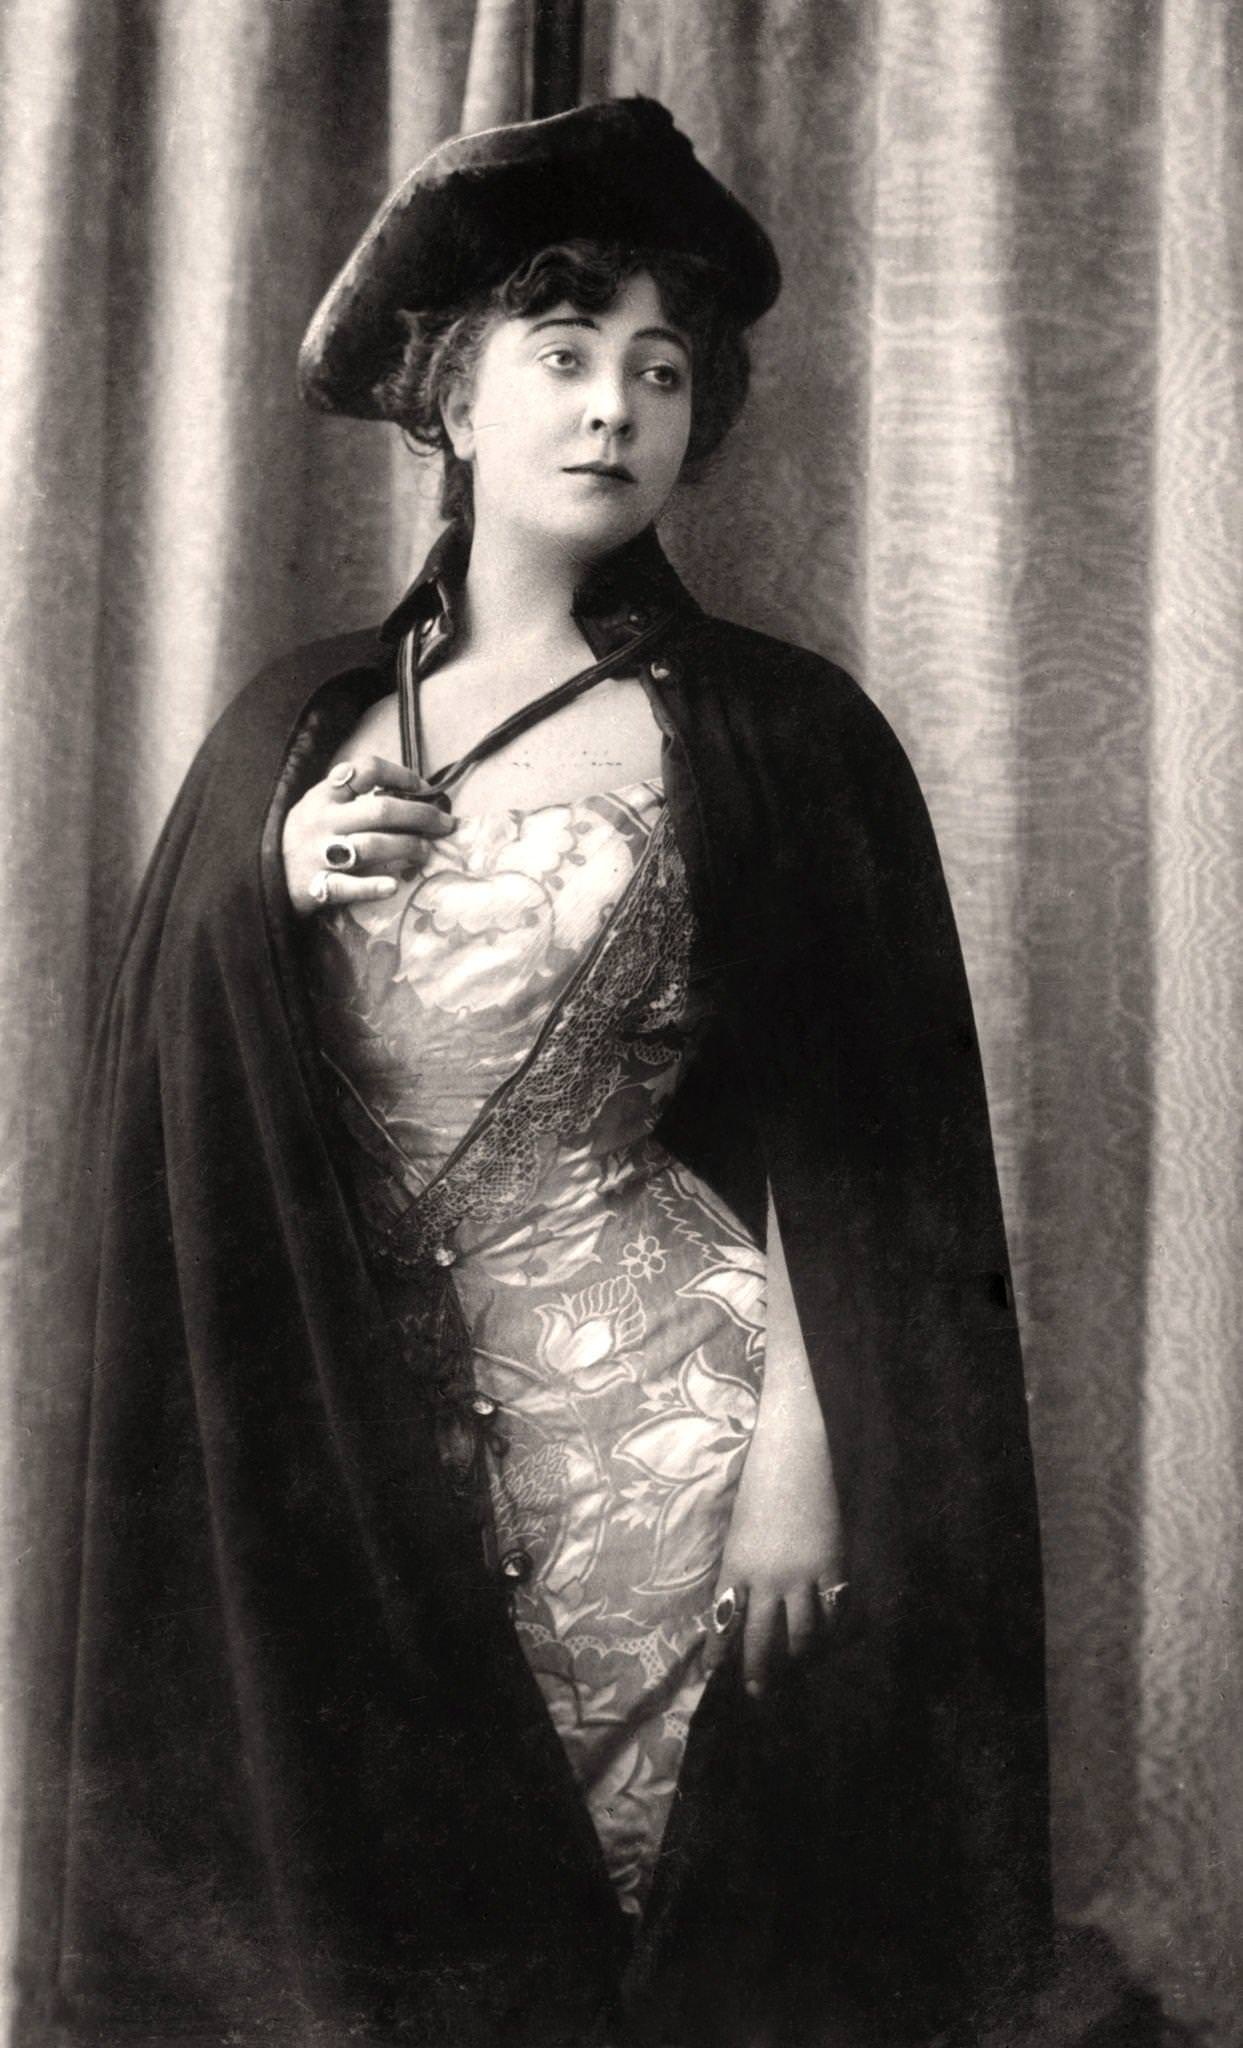 Marie Studholme poses for a portrait in 1904